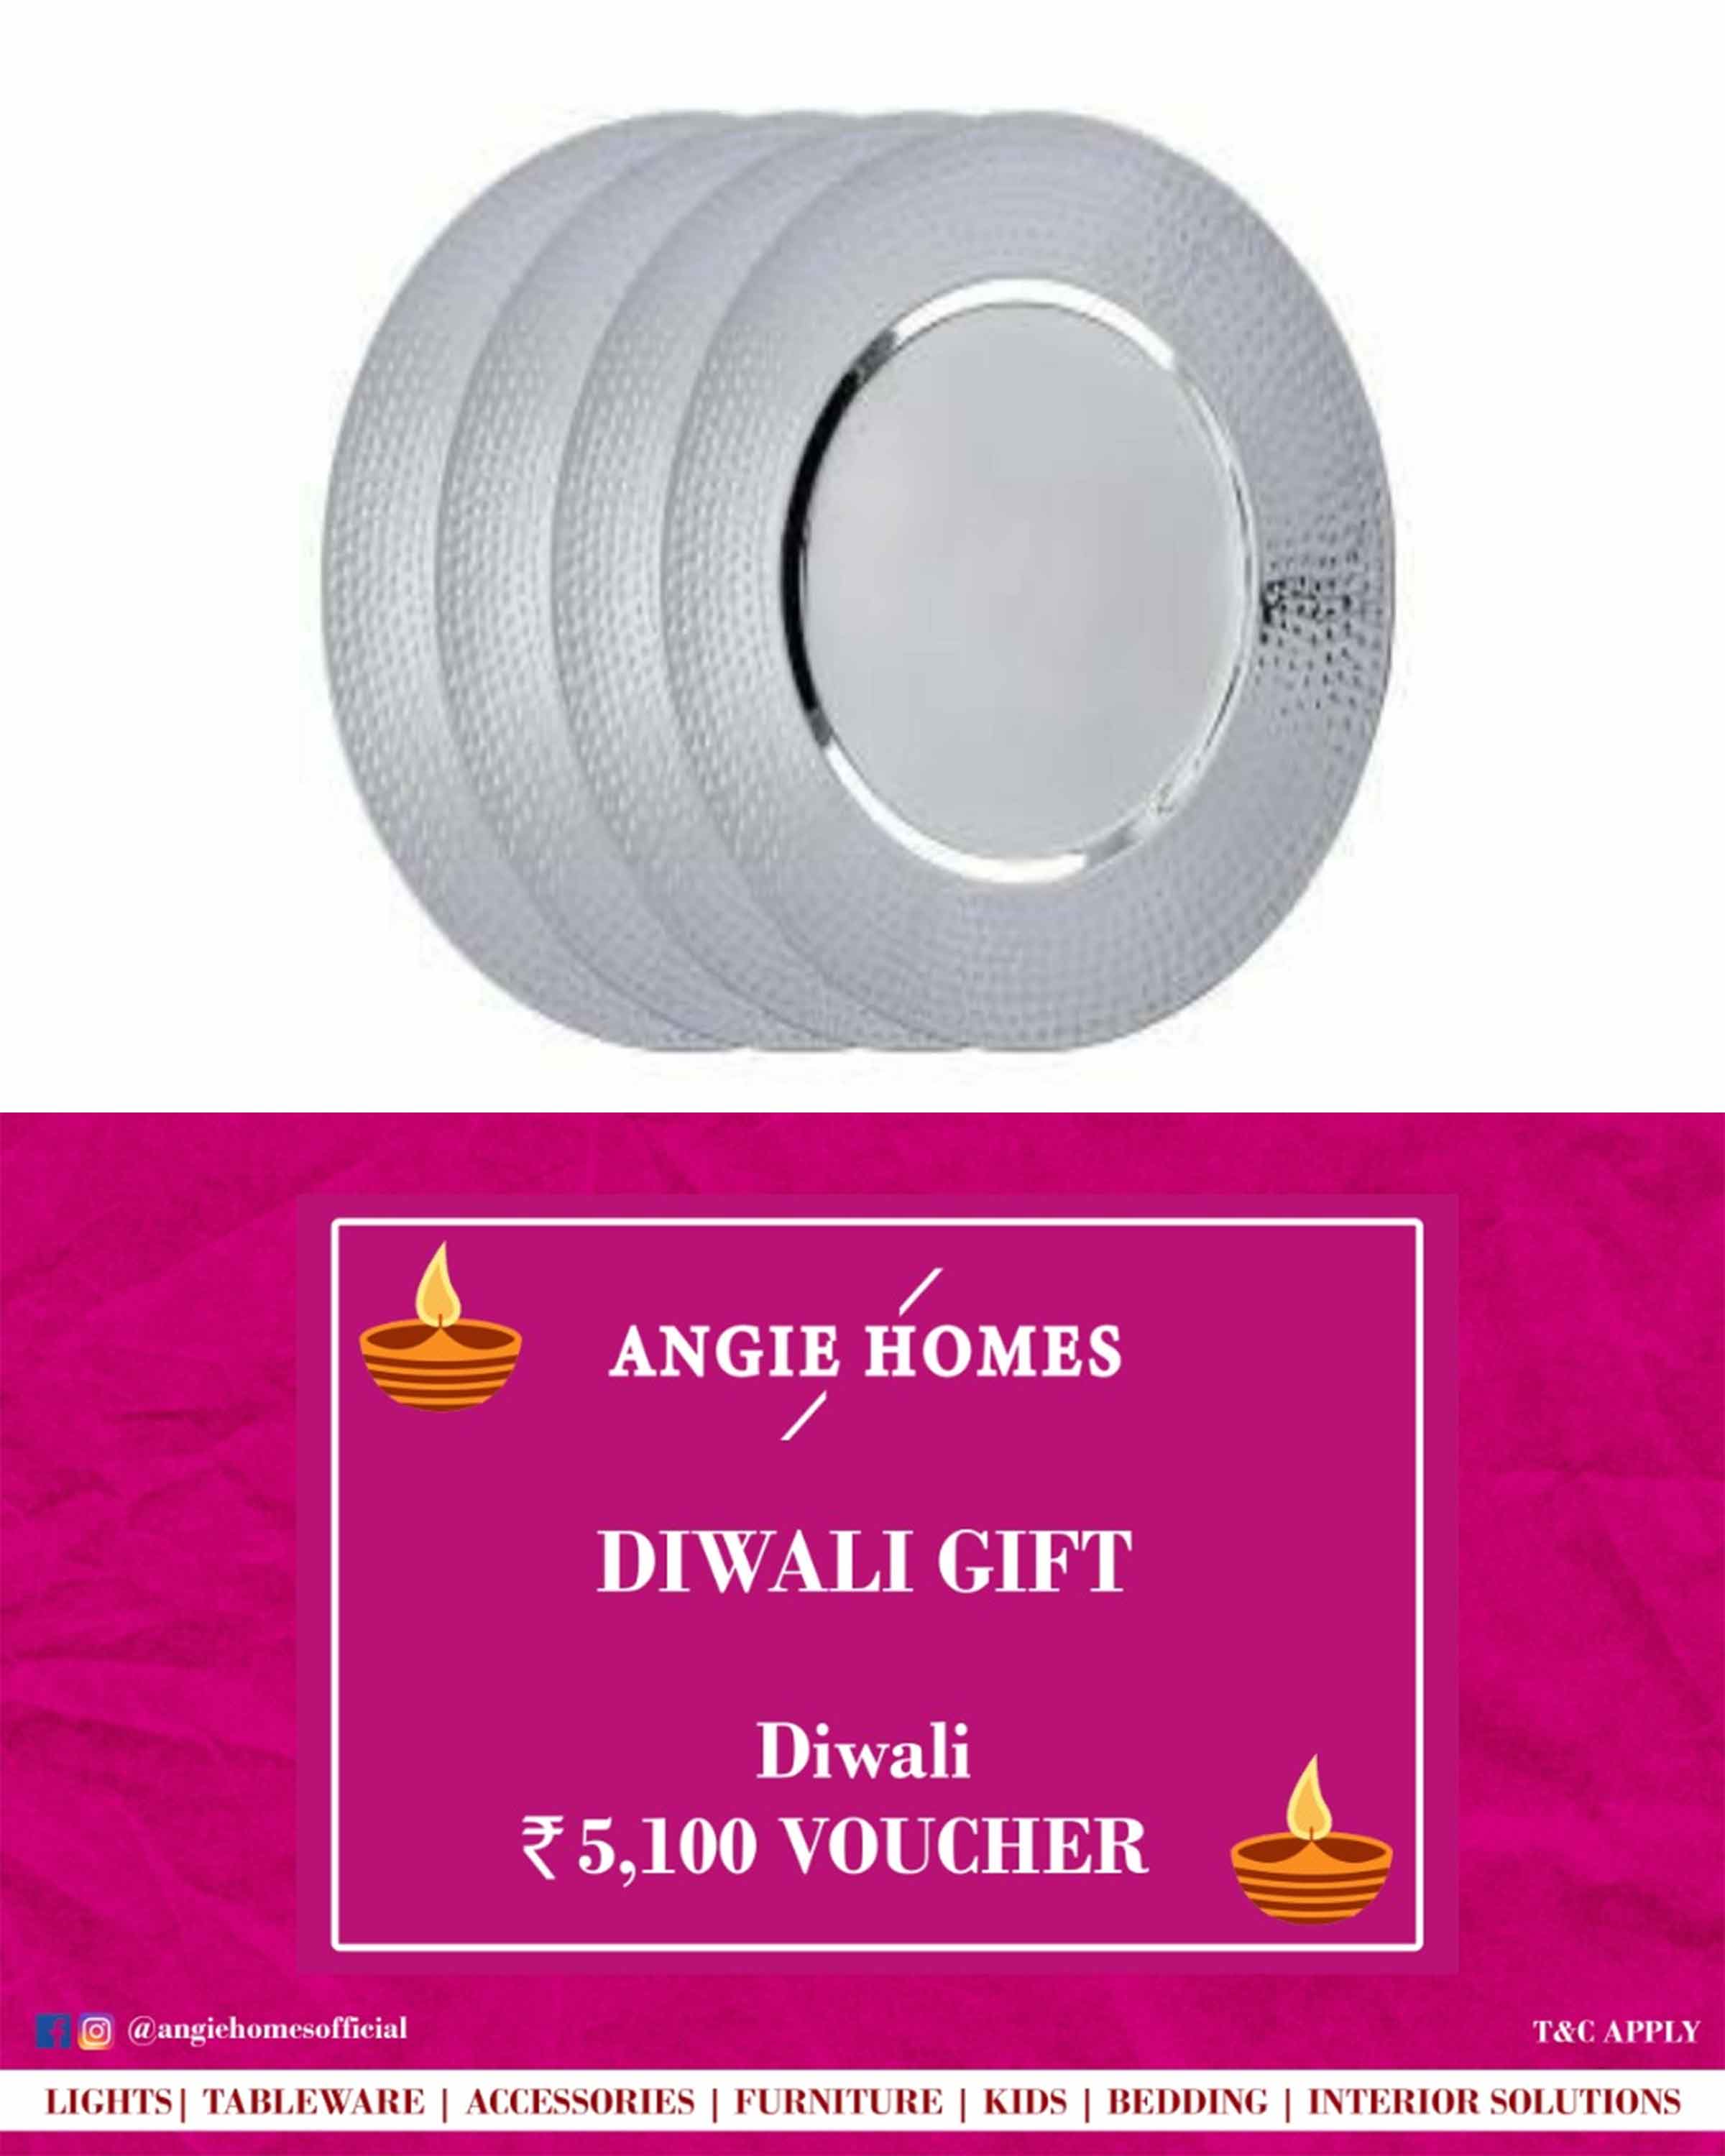 Online Diwali Gift Card Voucher for Silver Finish Plates | Serveware ANGIE HOMES